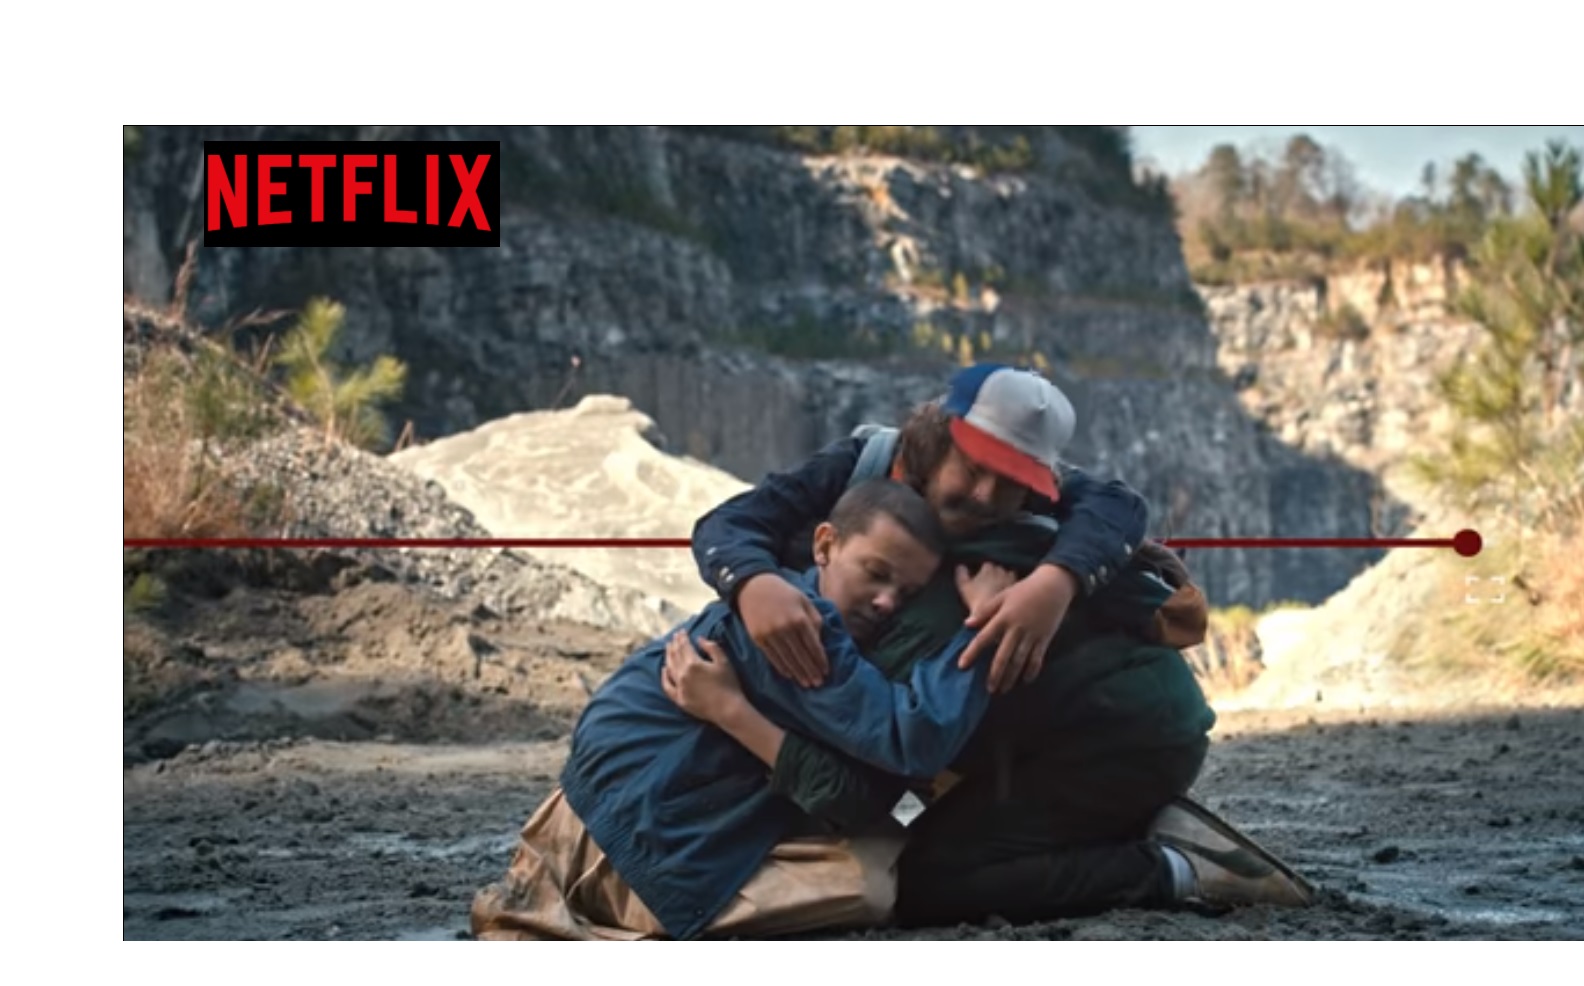 campaña ,global netflix, we’re only one story away, programapublicidad